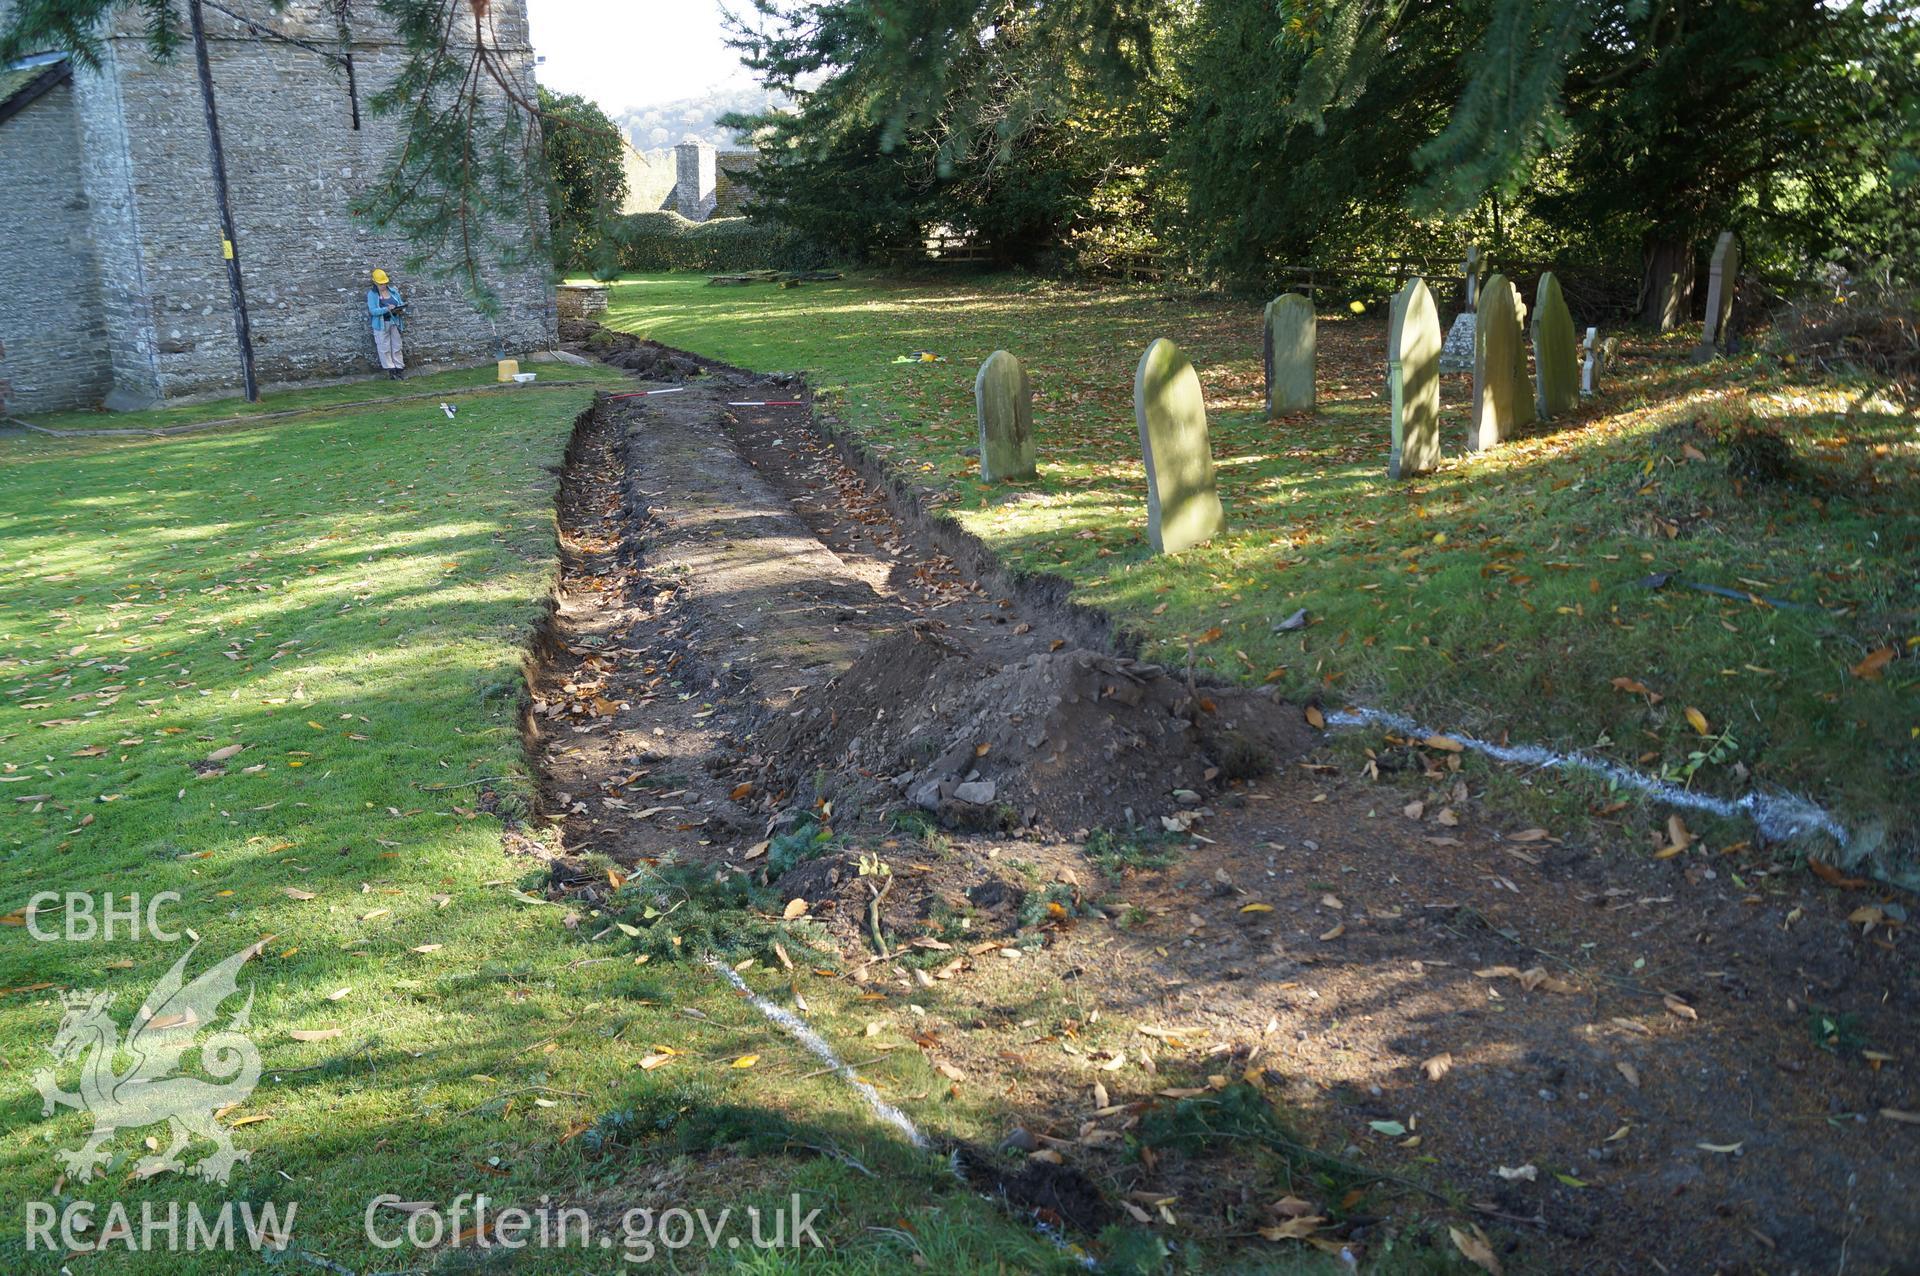 View 'looking east northeast at excavated trenches A and B, and central area of pathway retained' at St. Mary's, Gladestry, Powys. Photograph & description by Jenny Hall and Paul Sambrook of Trysor, 16th October 2017.